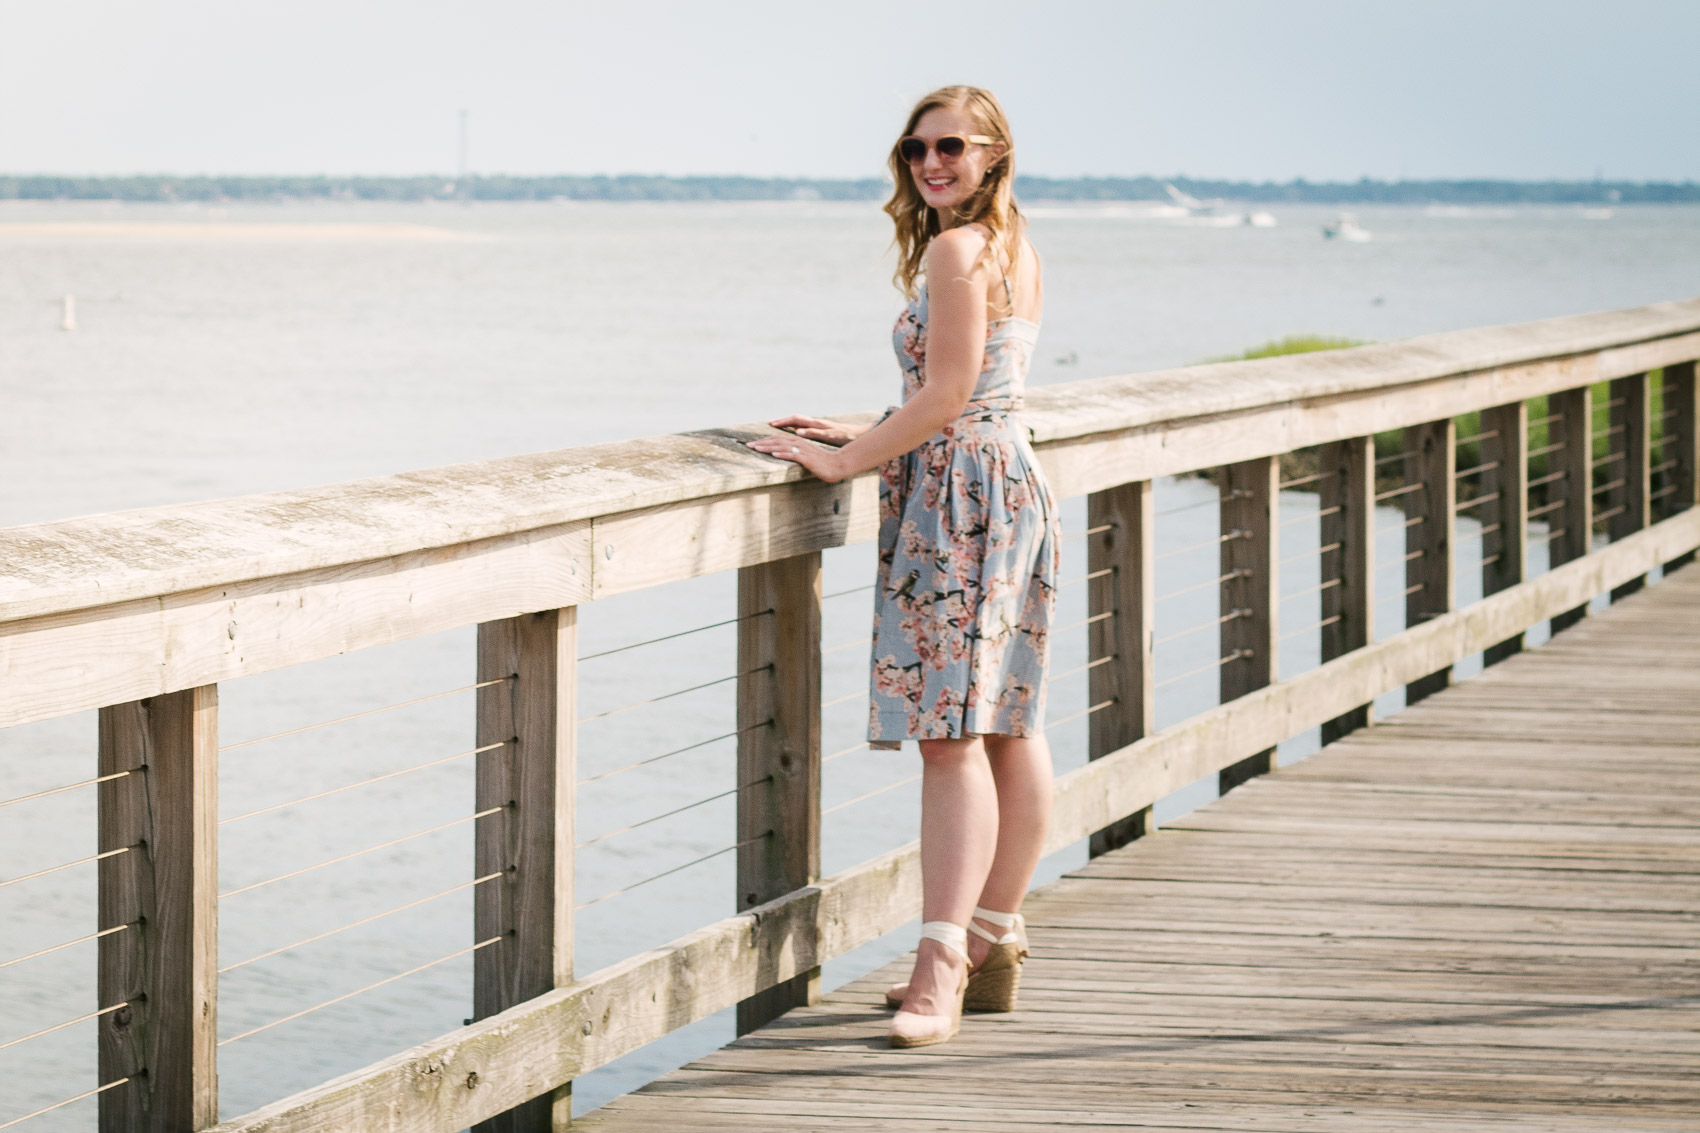 Things to Do in Mount Pleasant, SC: Dolphin Spotting at Shem Creek Park | Wearing the Gal Meets Glam Collection cherry blossom print Daphne dress with pink wedge espadrilles 